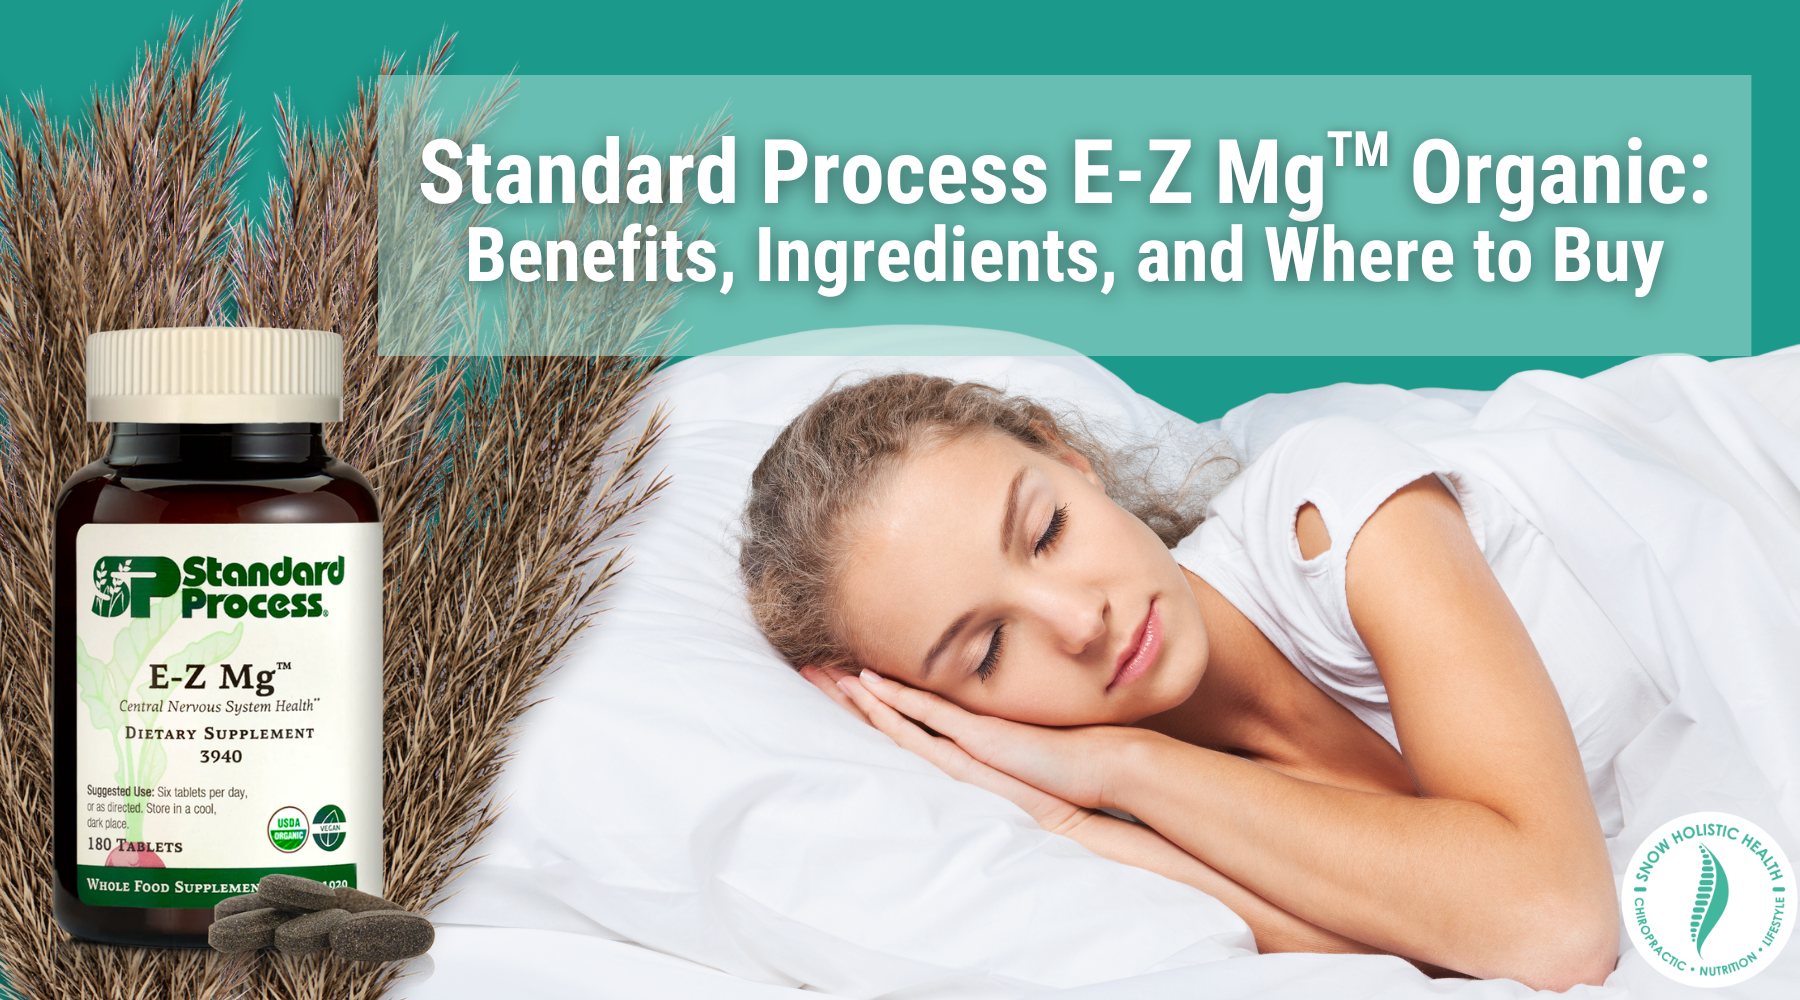 Image of woman sleeping with caption "Standard Process E-Z Mg Organic: Benefits, Ingredients, and Where to Buy"